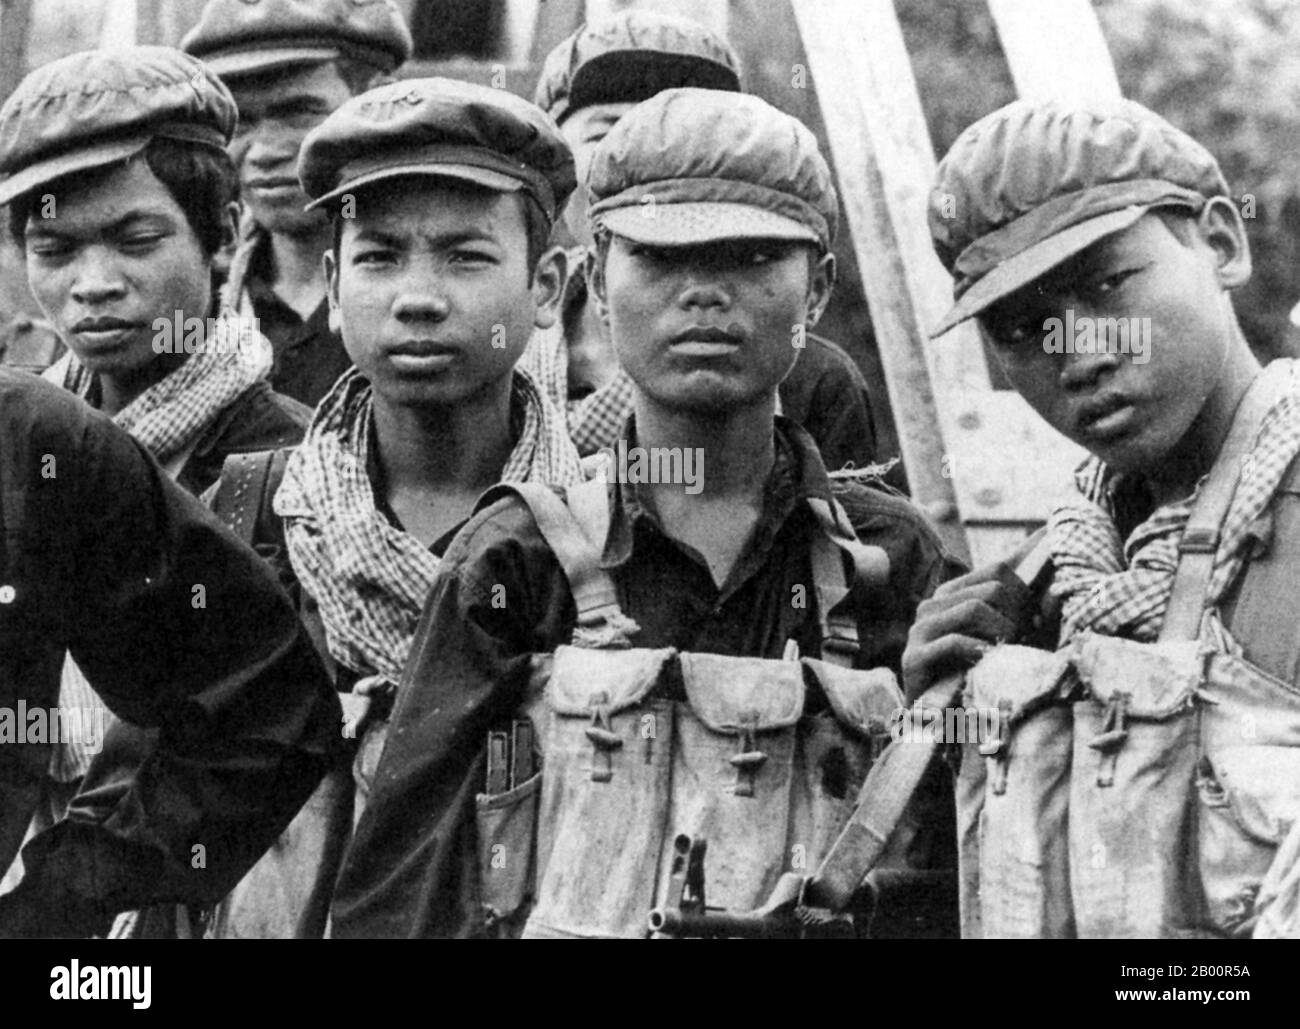 Cambodia: Khmer Rouge soldiers, 1975. The Khmer Rouge, or Communist Party  of Kampuchea, ruled Cambodia from 1975 to 1979, led by Pol Pot, Nuon Chea,  Ieng Sary, Son Sen and Khieu Samphan.